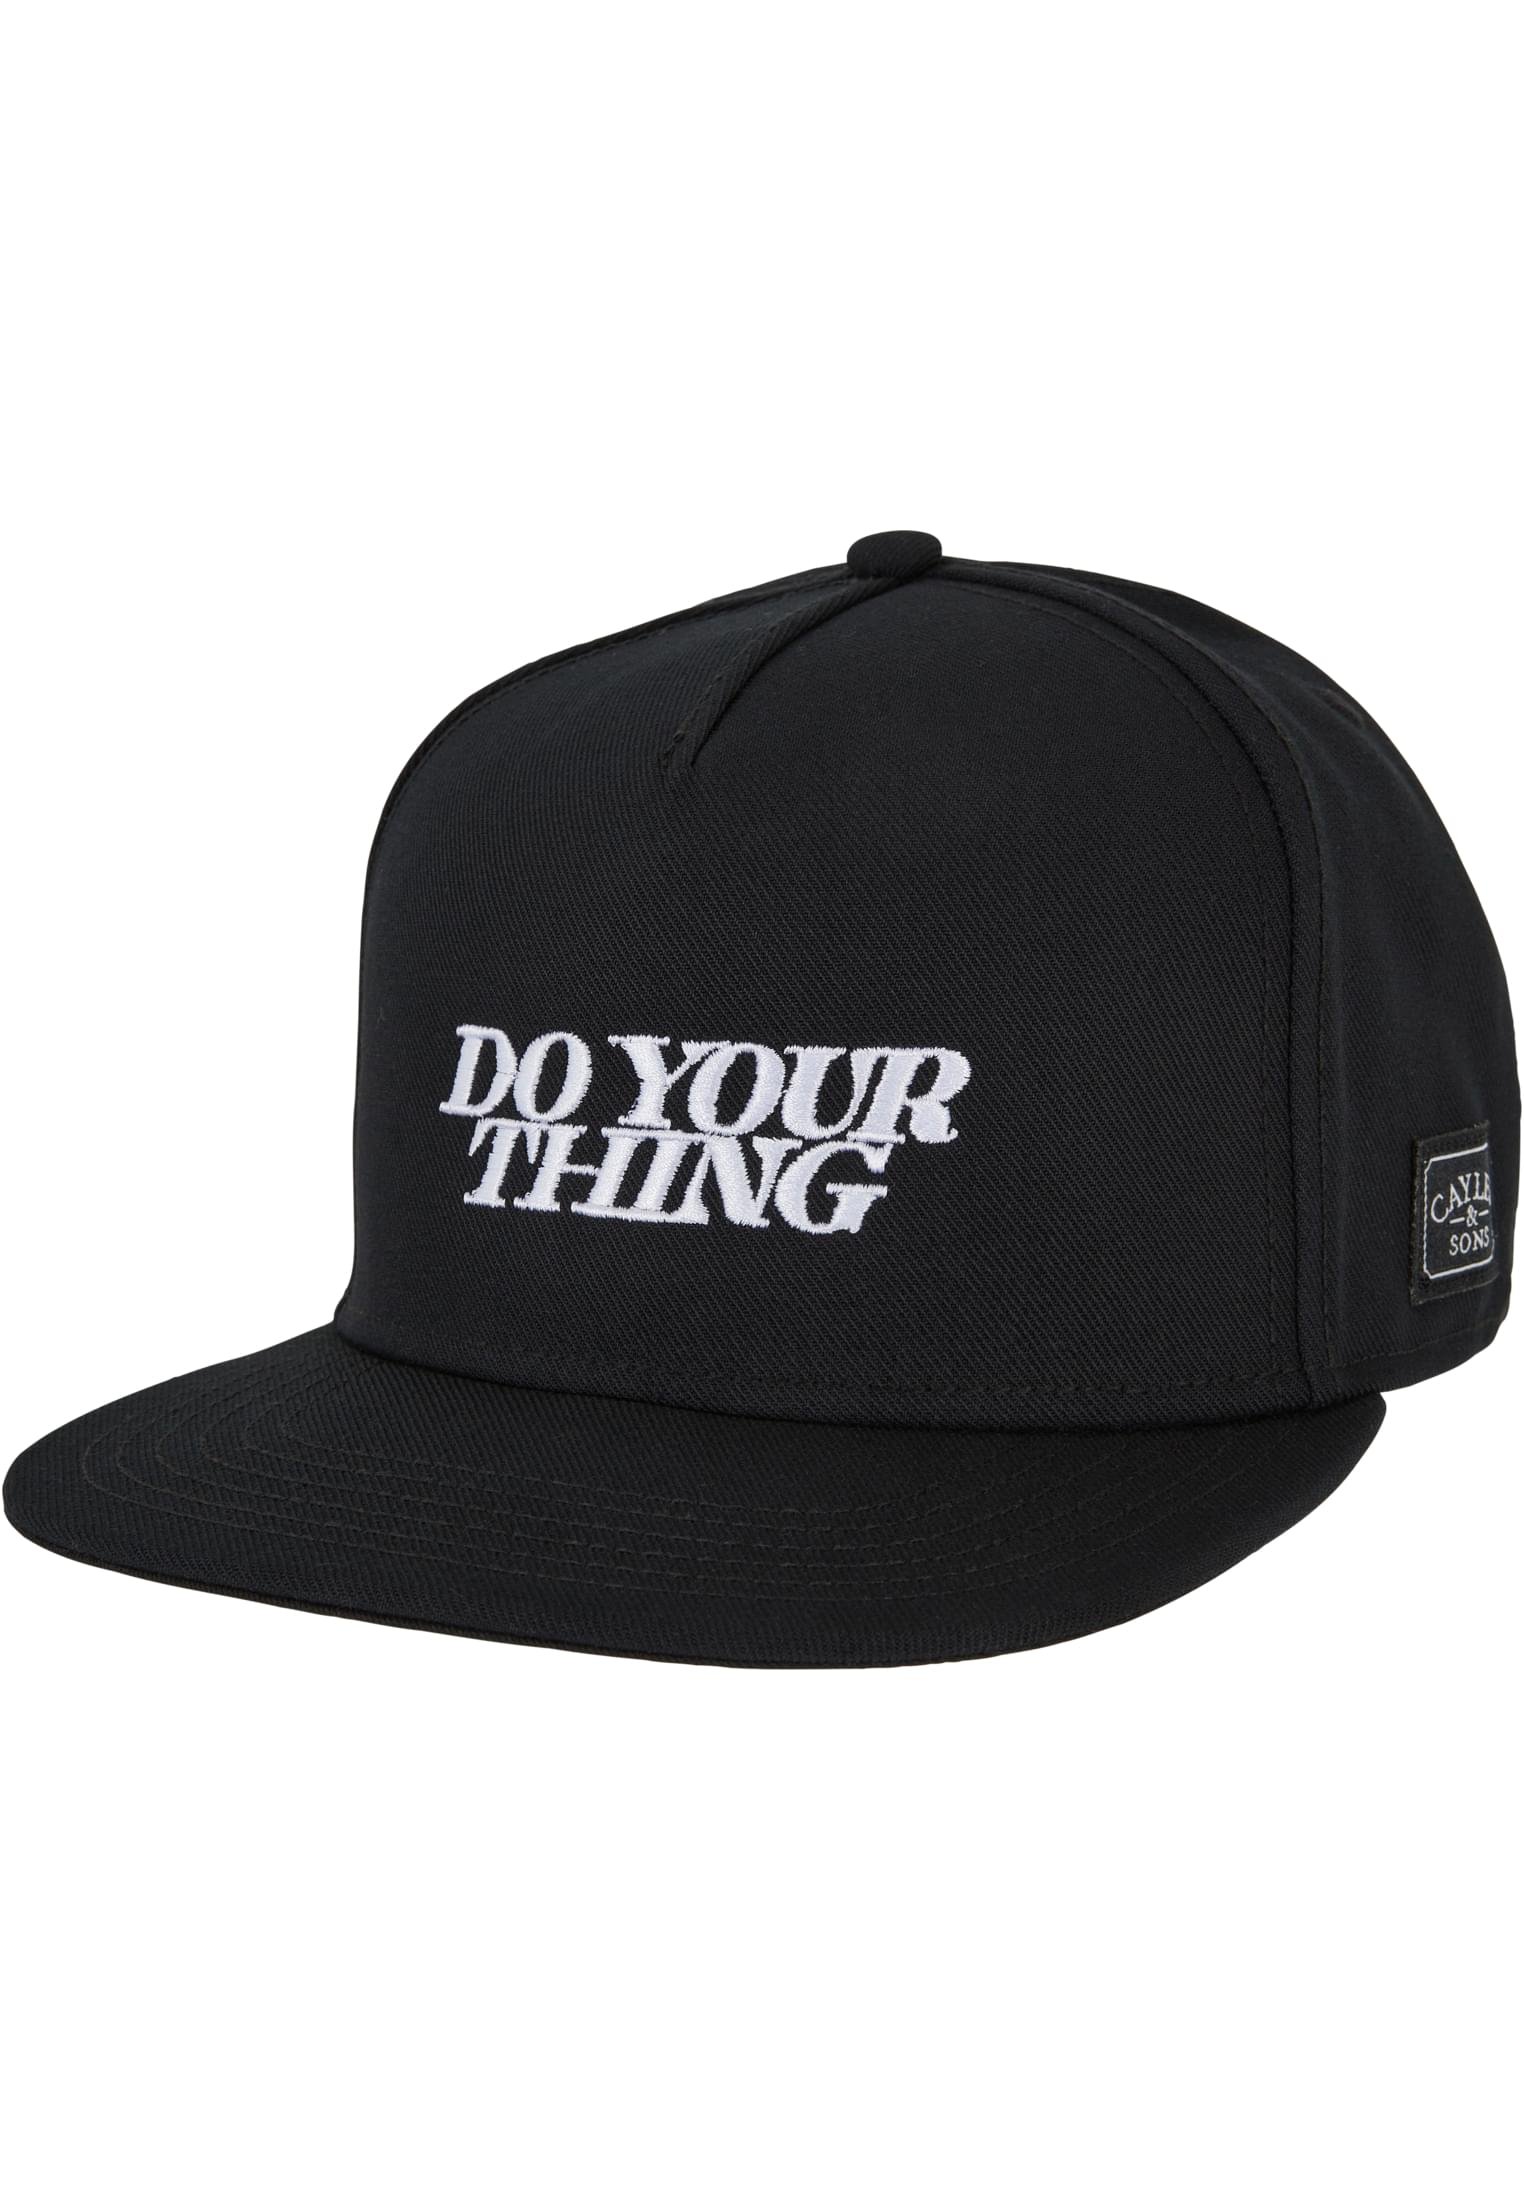 Do Your Thing P Cap black one size